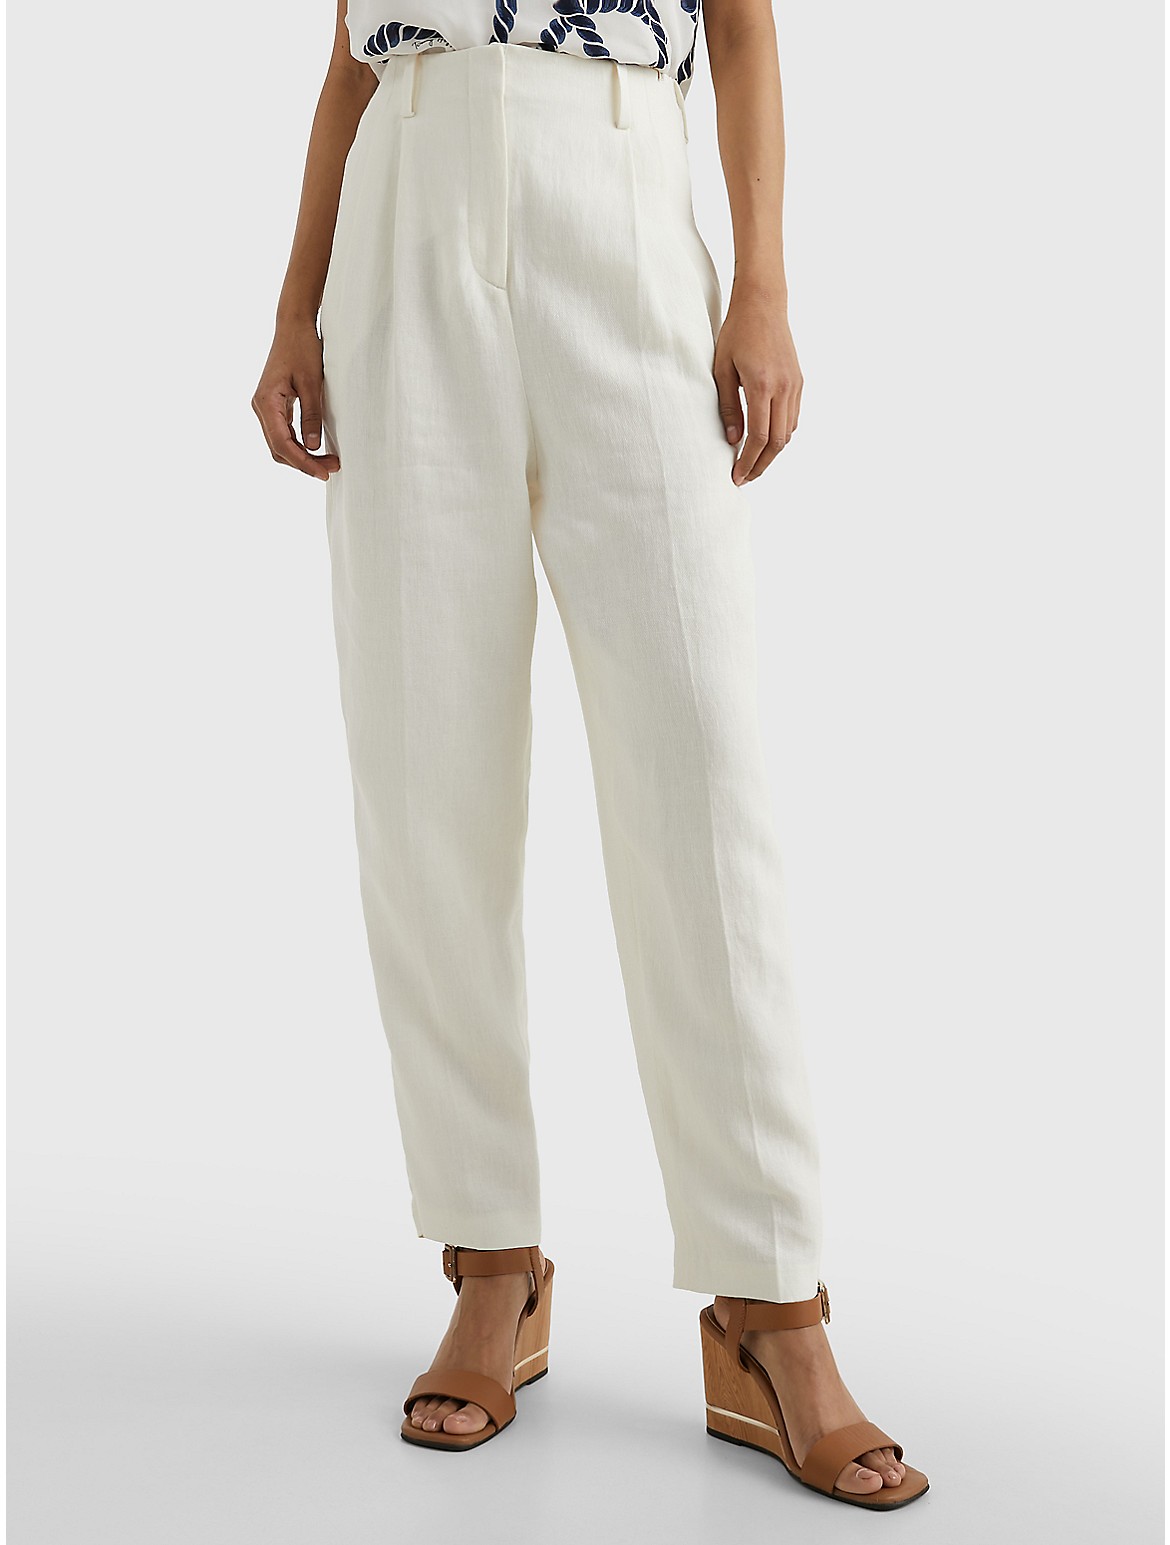 TOMMY HILFIGER TAPERED LINEN PANT